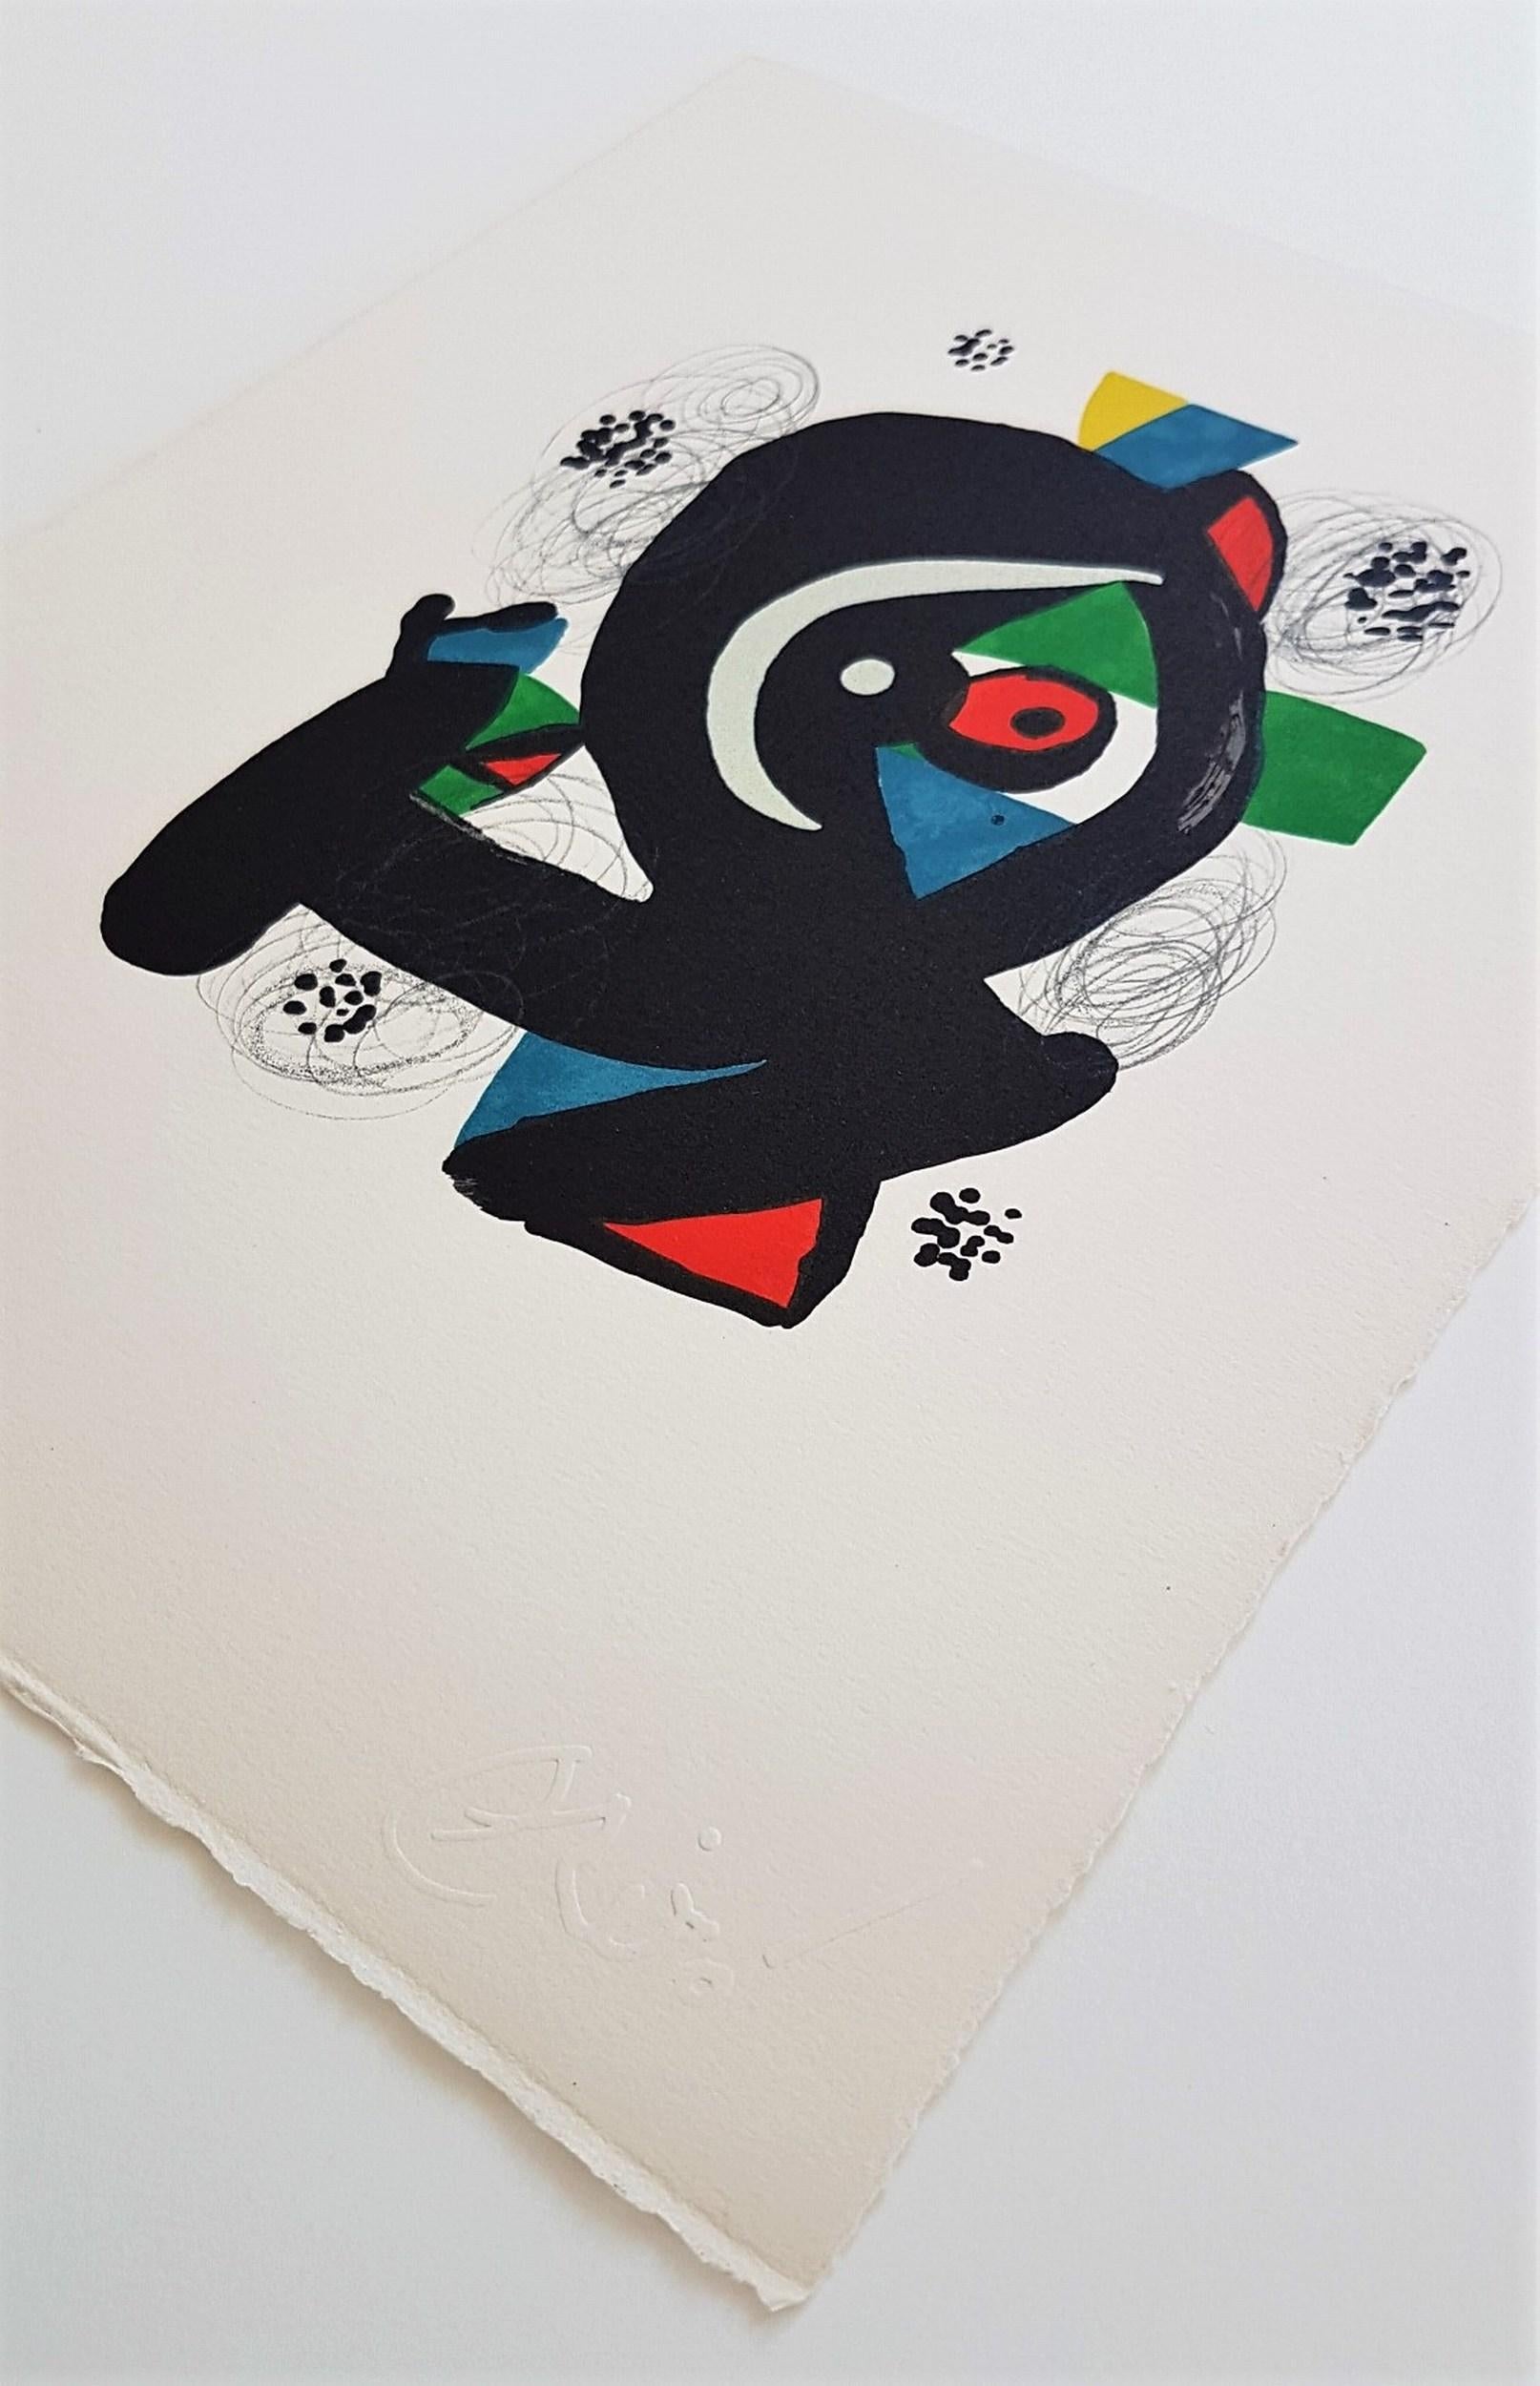 Joan Miró
La Mélodie Acide - 2
Color lithograph
Year: 1980
Edition: 1500
Artist Dry Stamp lower right, 
Annotated  